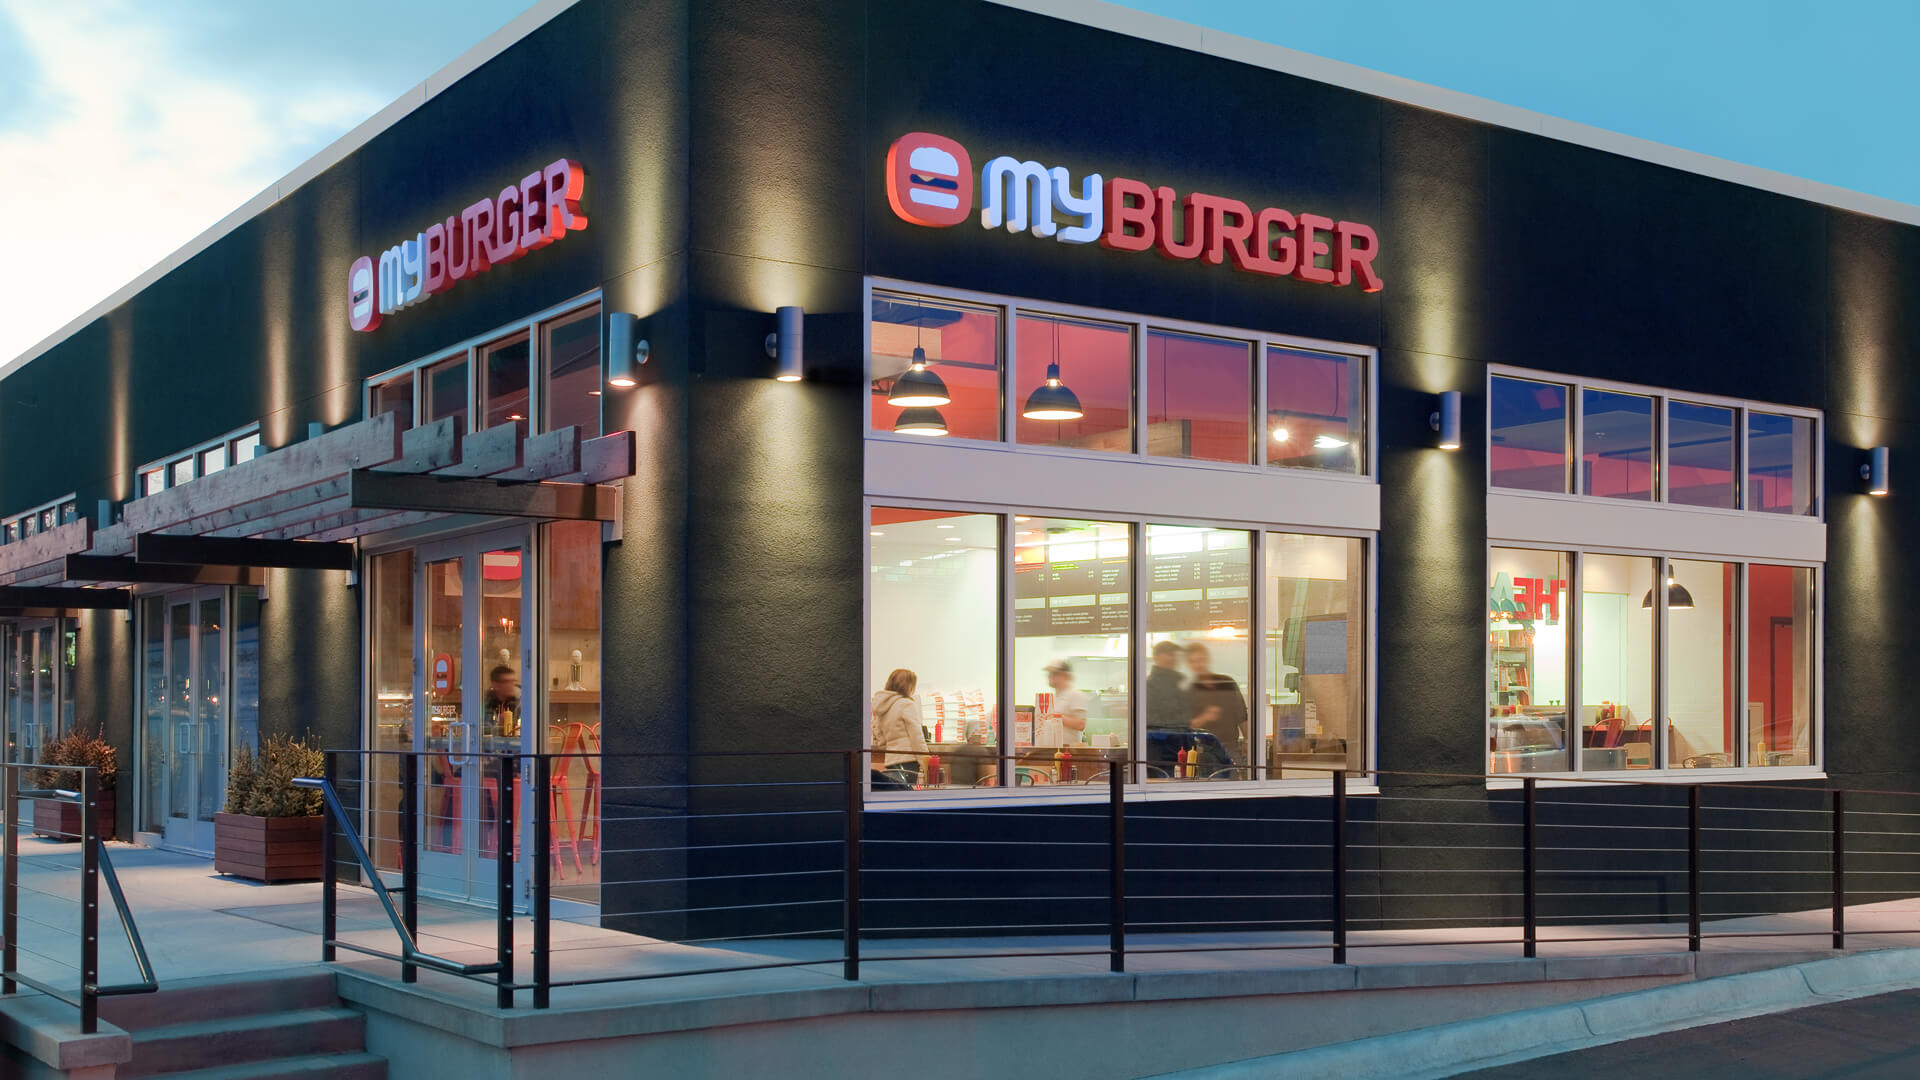 A wide angle shot of the MyBurger exterior storefront.